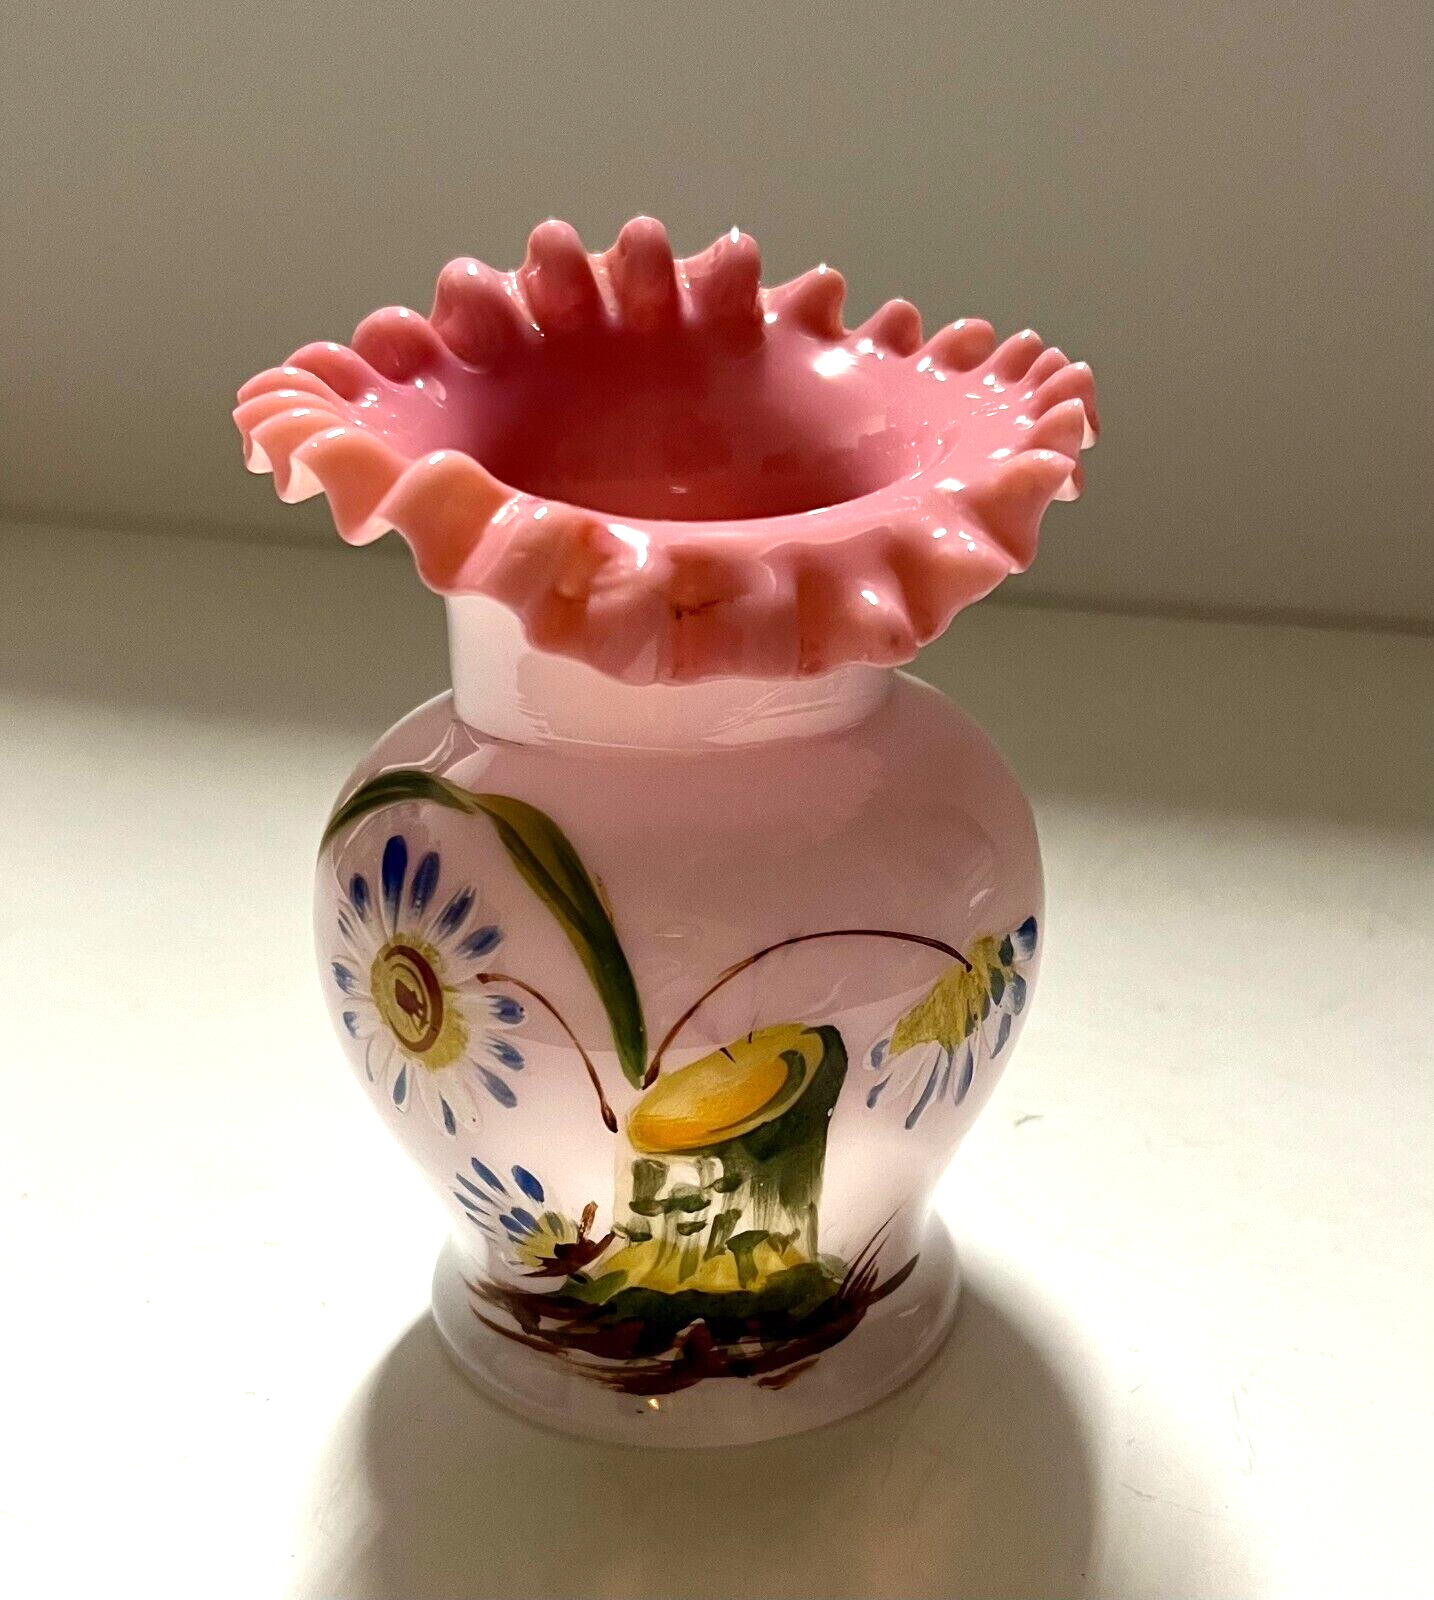 Bristol Ware England Antique Glass Fire Hand Painted Pink Ruffled Vase  5 1/8